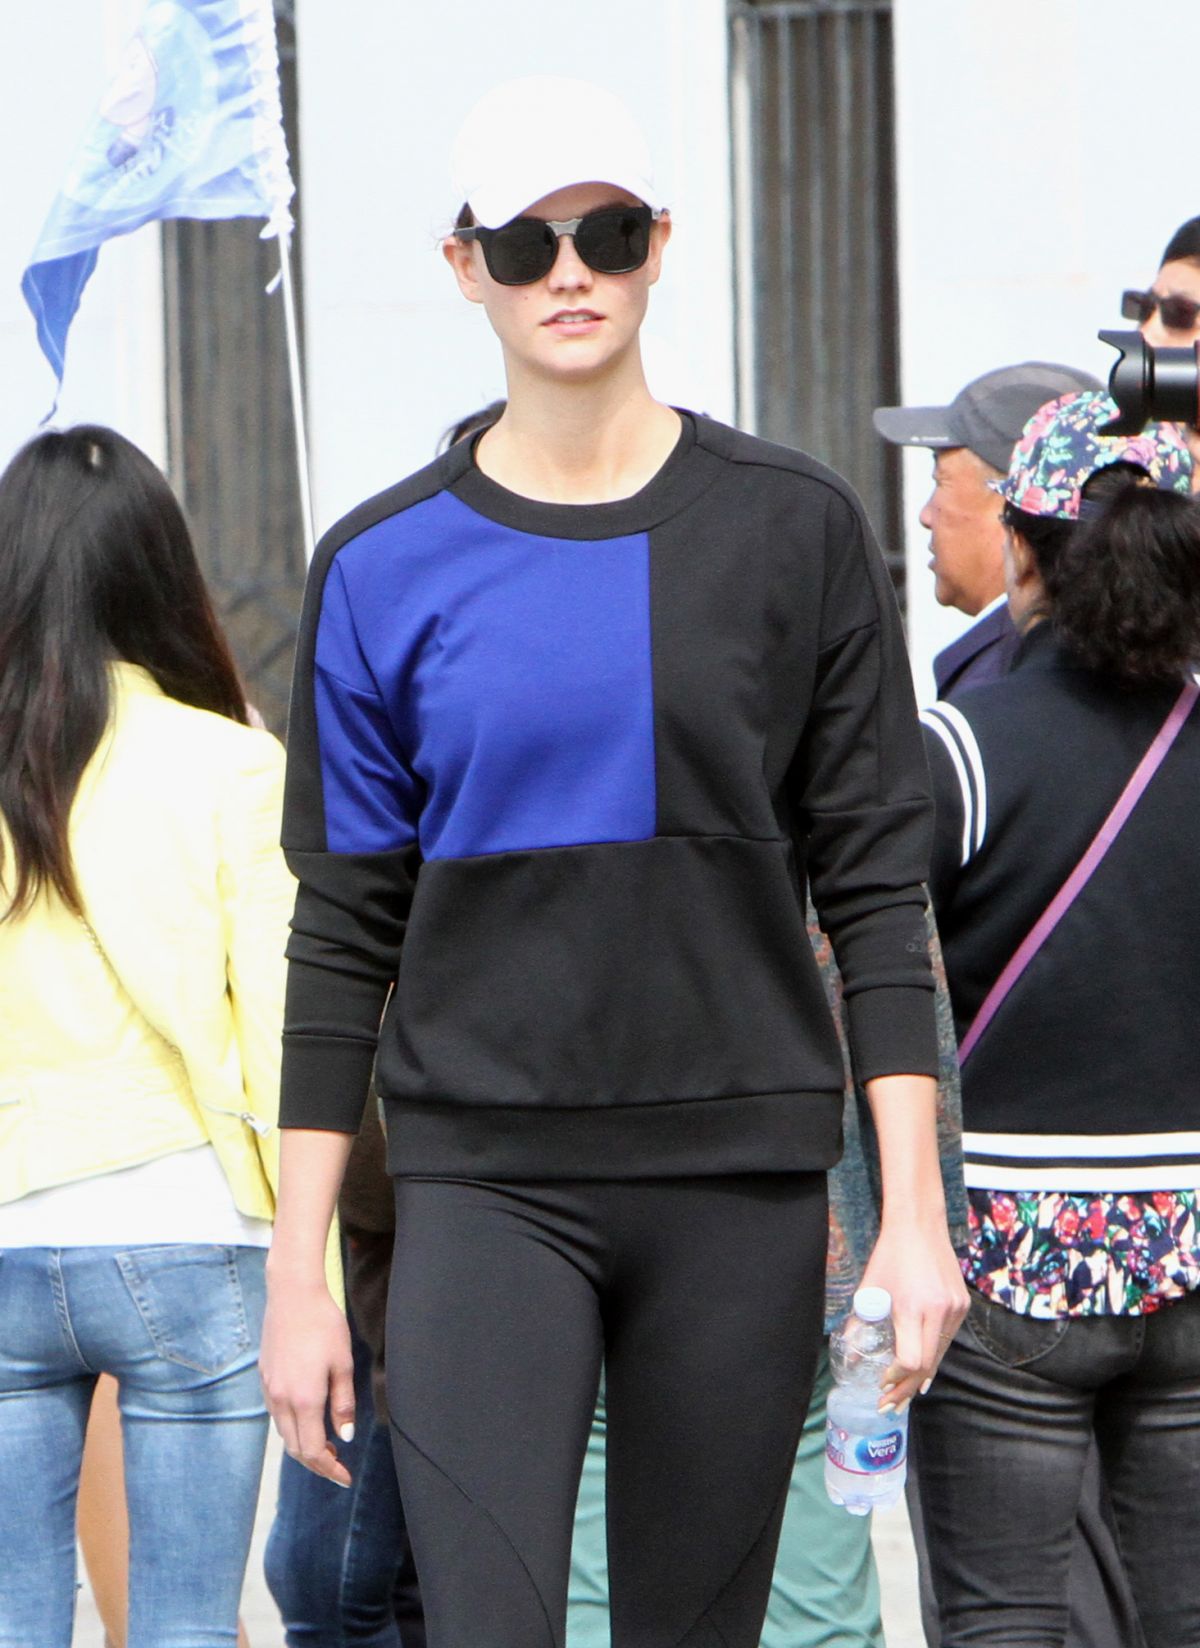 karlie-kloss-out-and-about-in-venice-05-11-2019-7.jpg